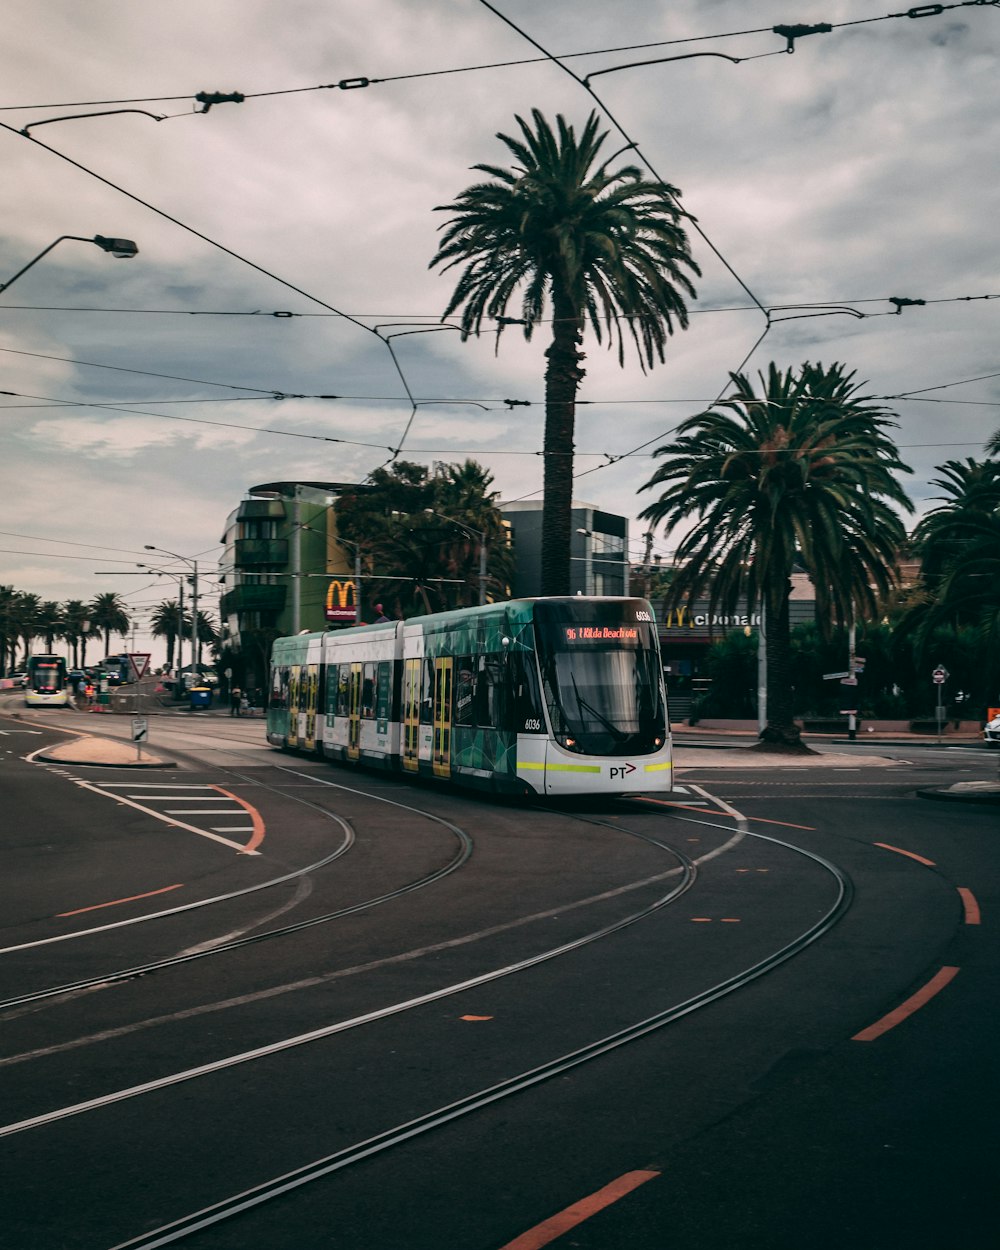 green and white tram on road during daytime